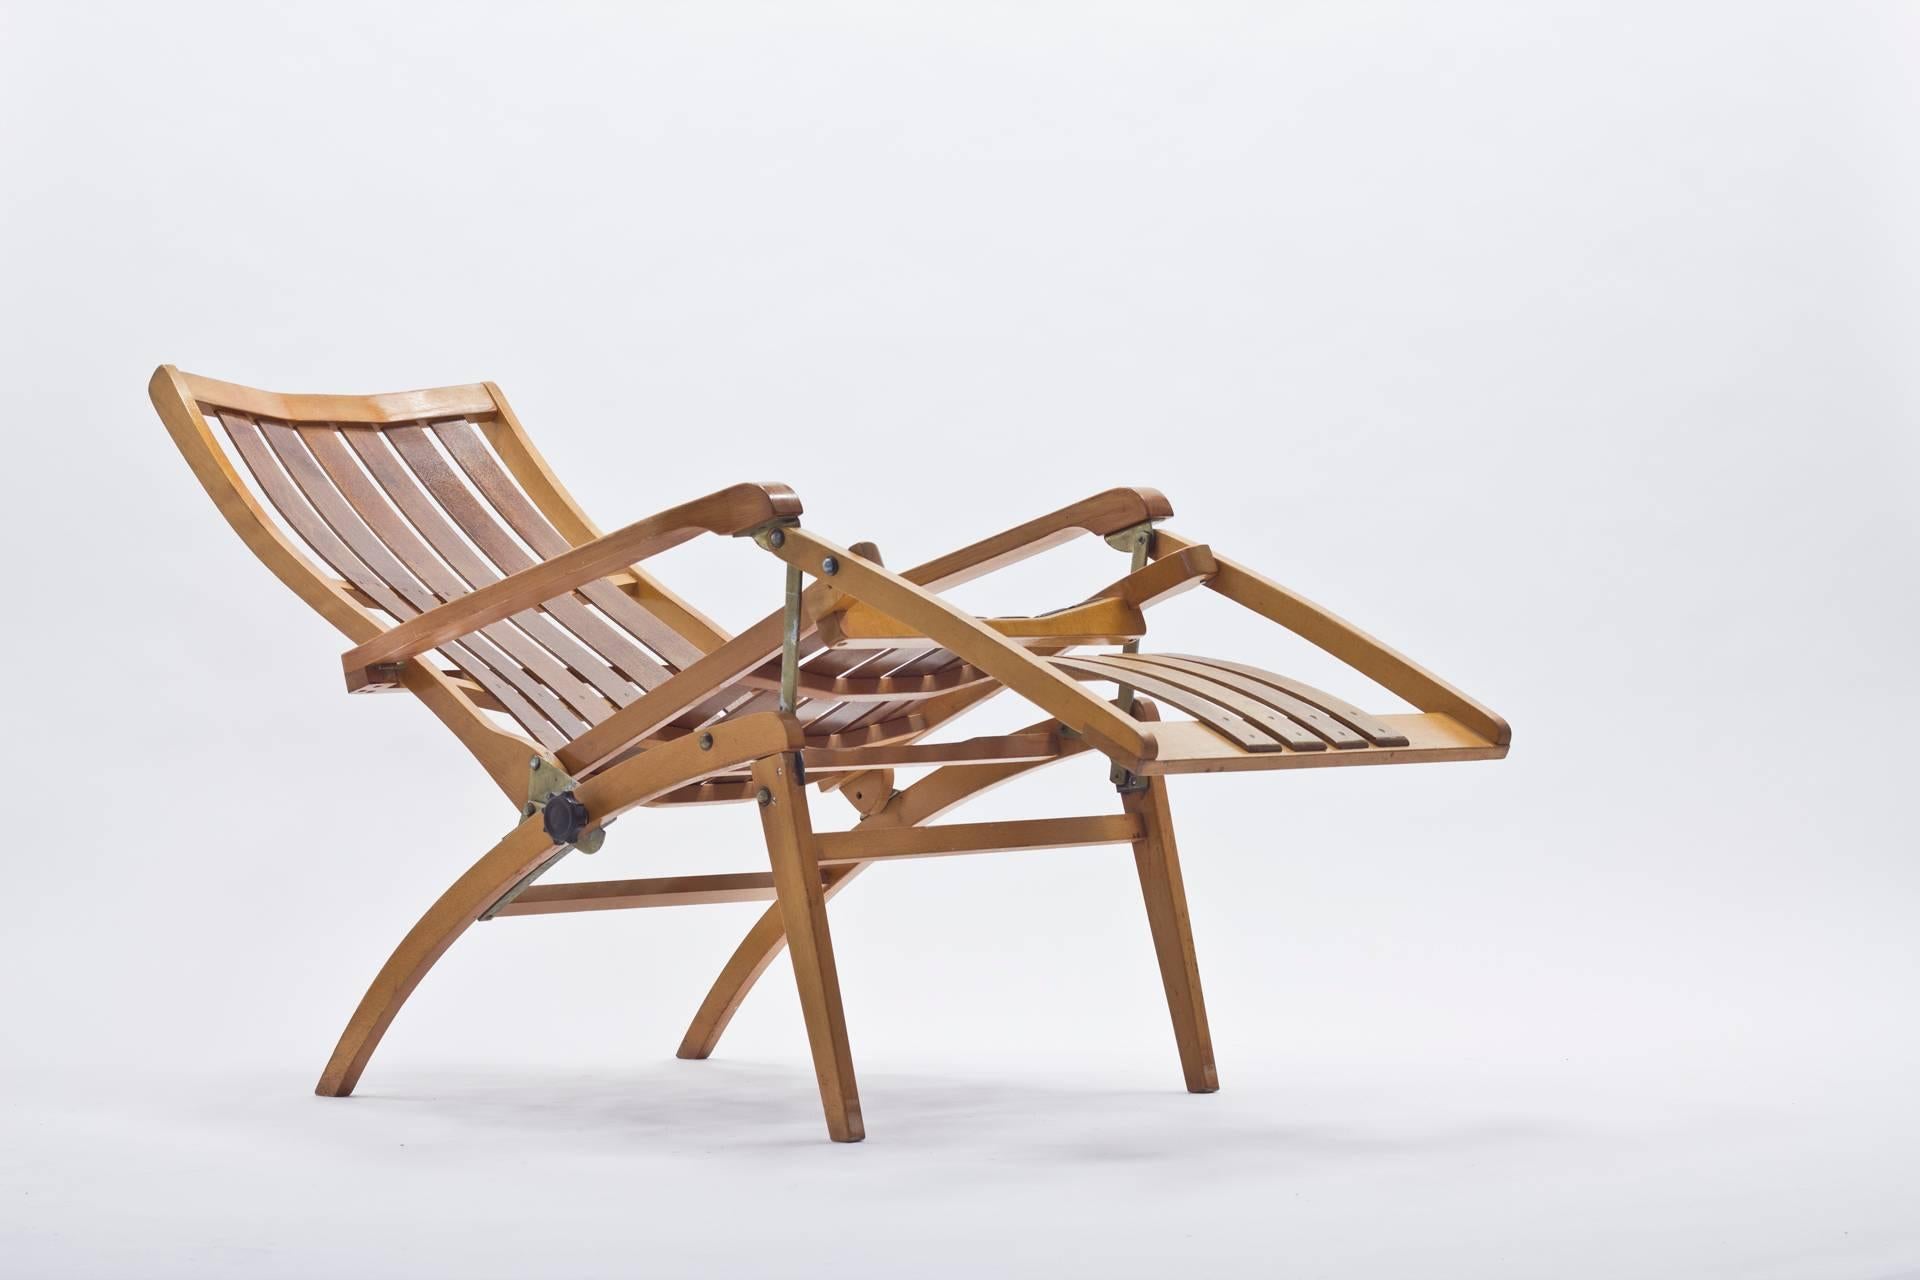 Adjustable folding chair, model Siesta Medizinal, designed in 1936 by Hans & Wassili Luckhardt for Thonet. Overall good vintage condition with ware consistent with age and use.